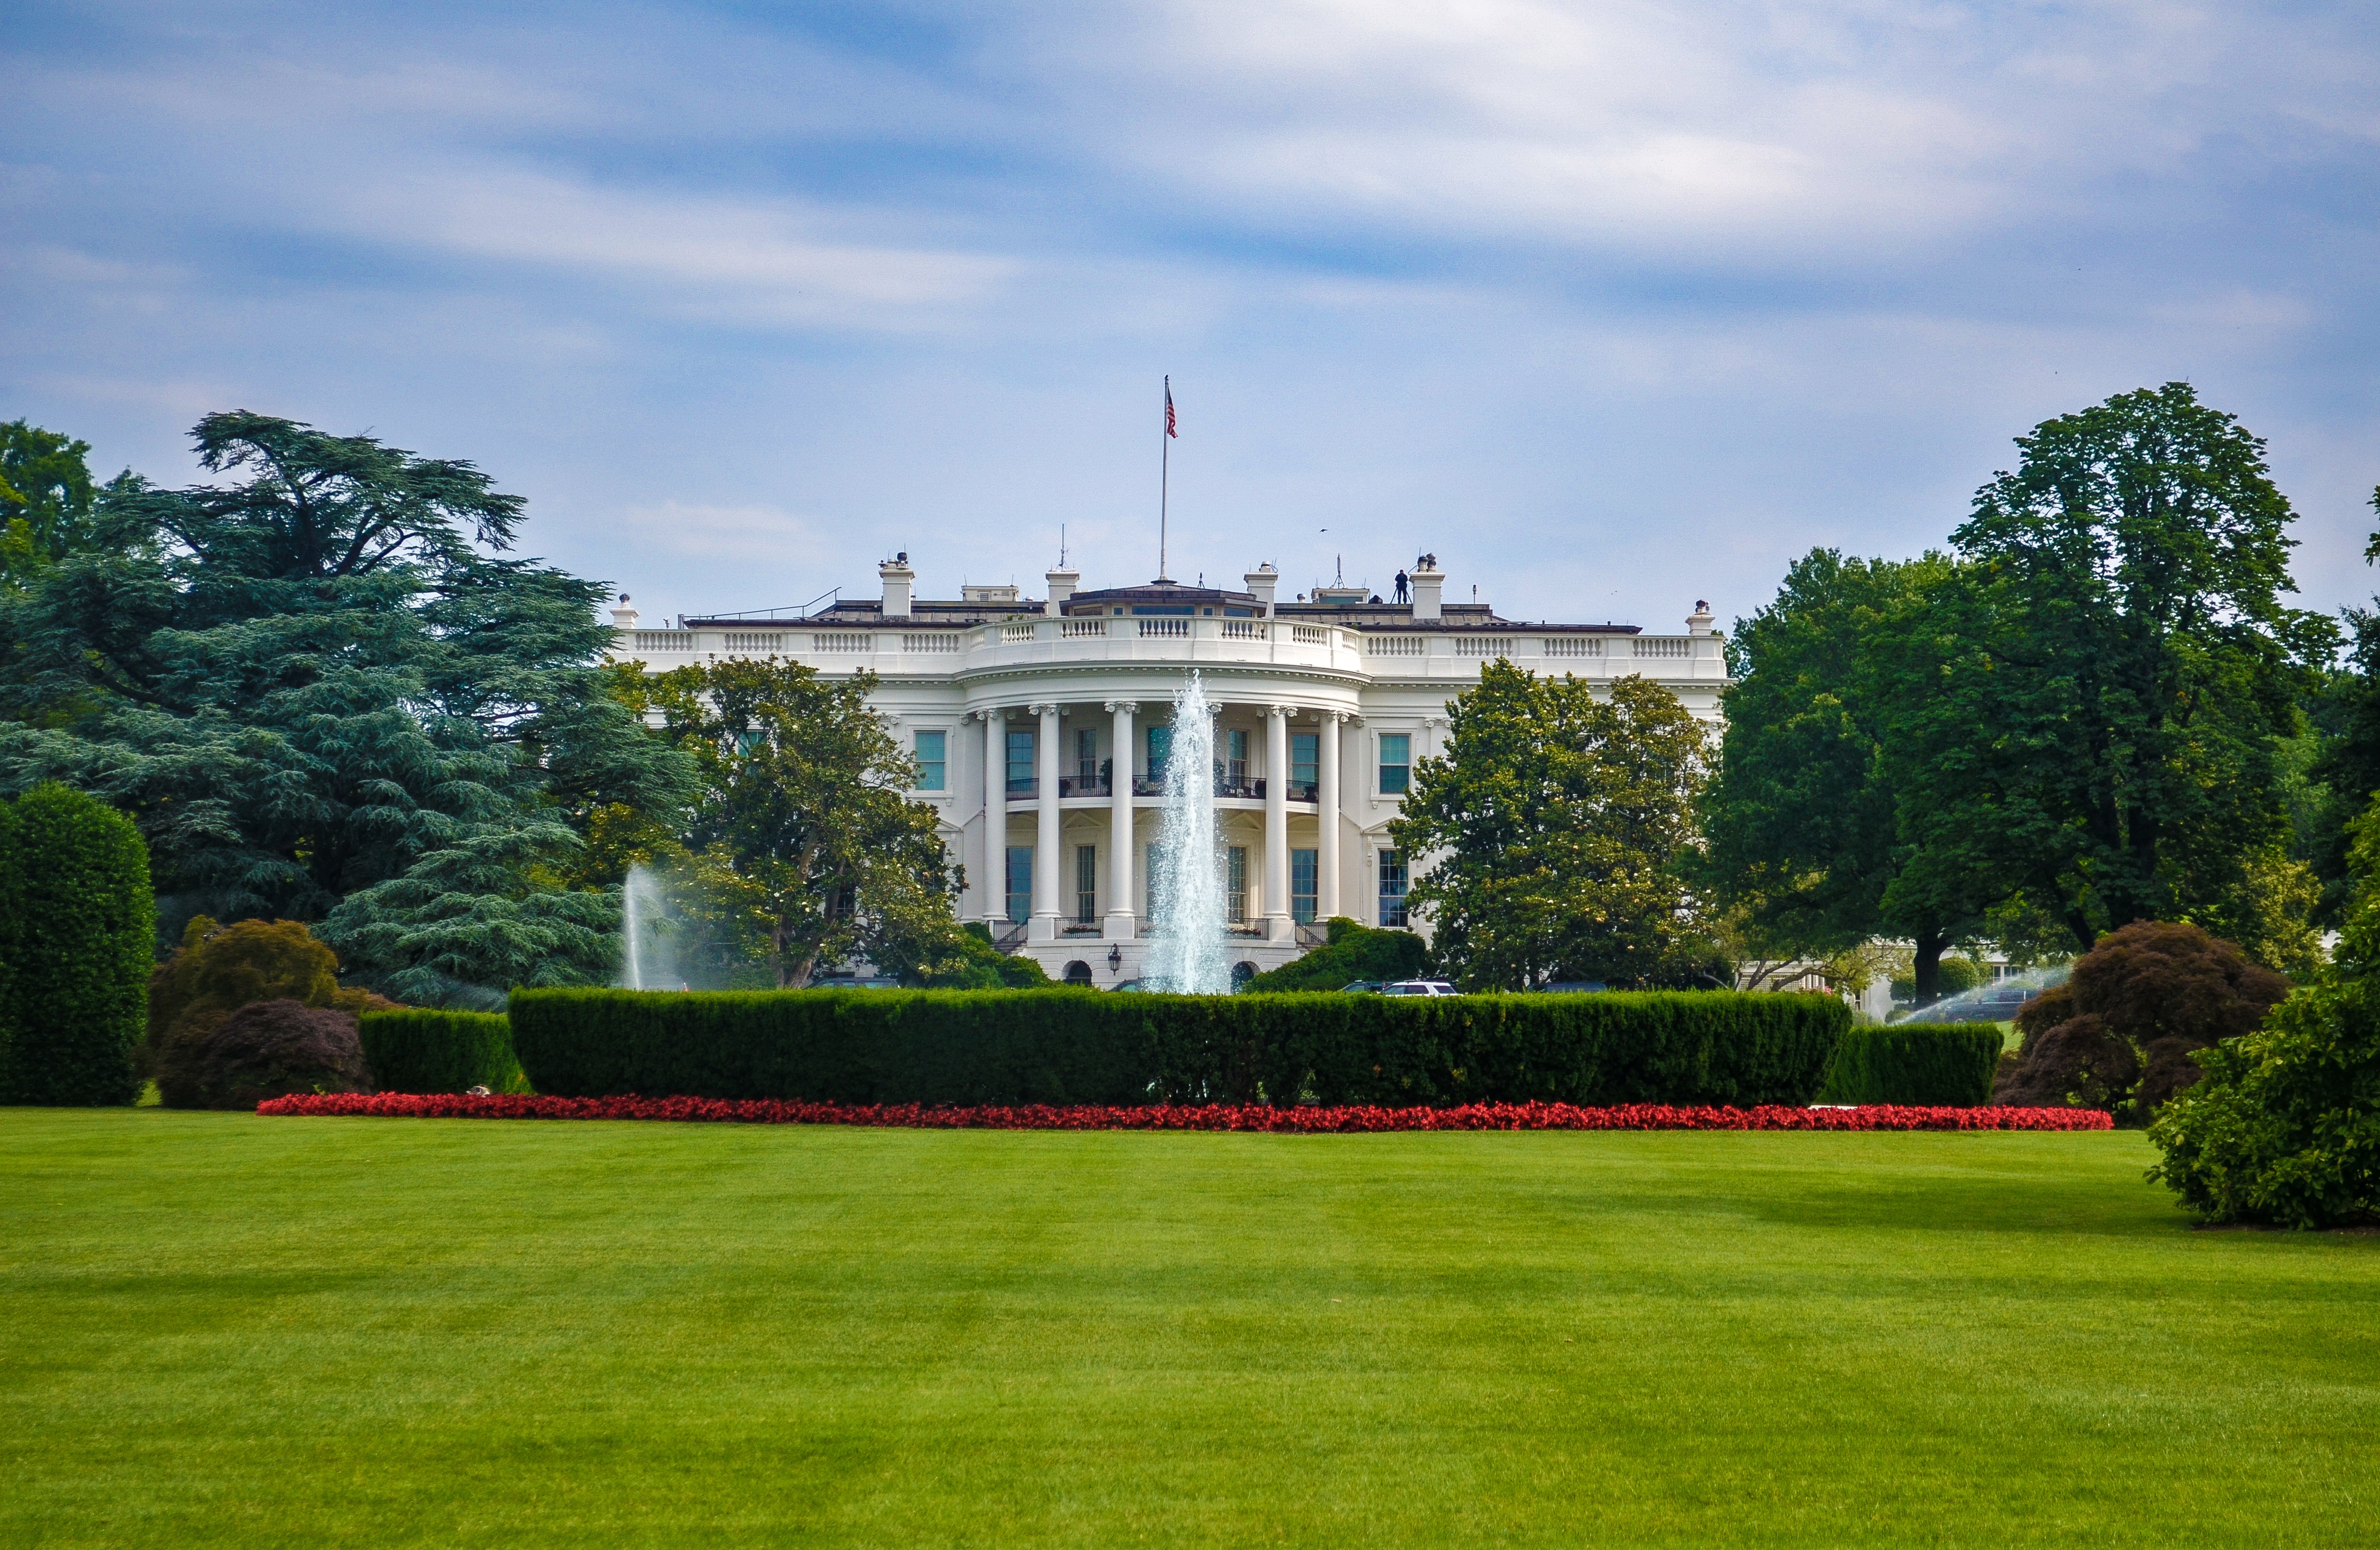 Oil Producers Brace for Post-Election Policy Shift if White House adminsitration changes in 2020 election reports BPN the propane industry's leading source for news since 1939